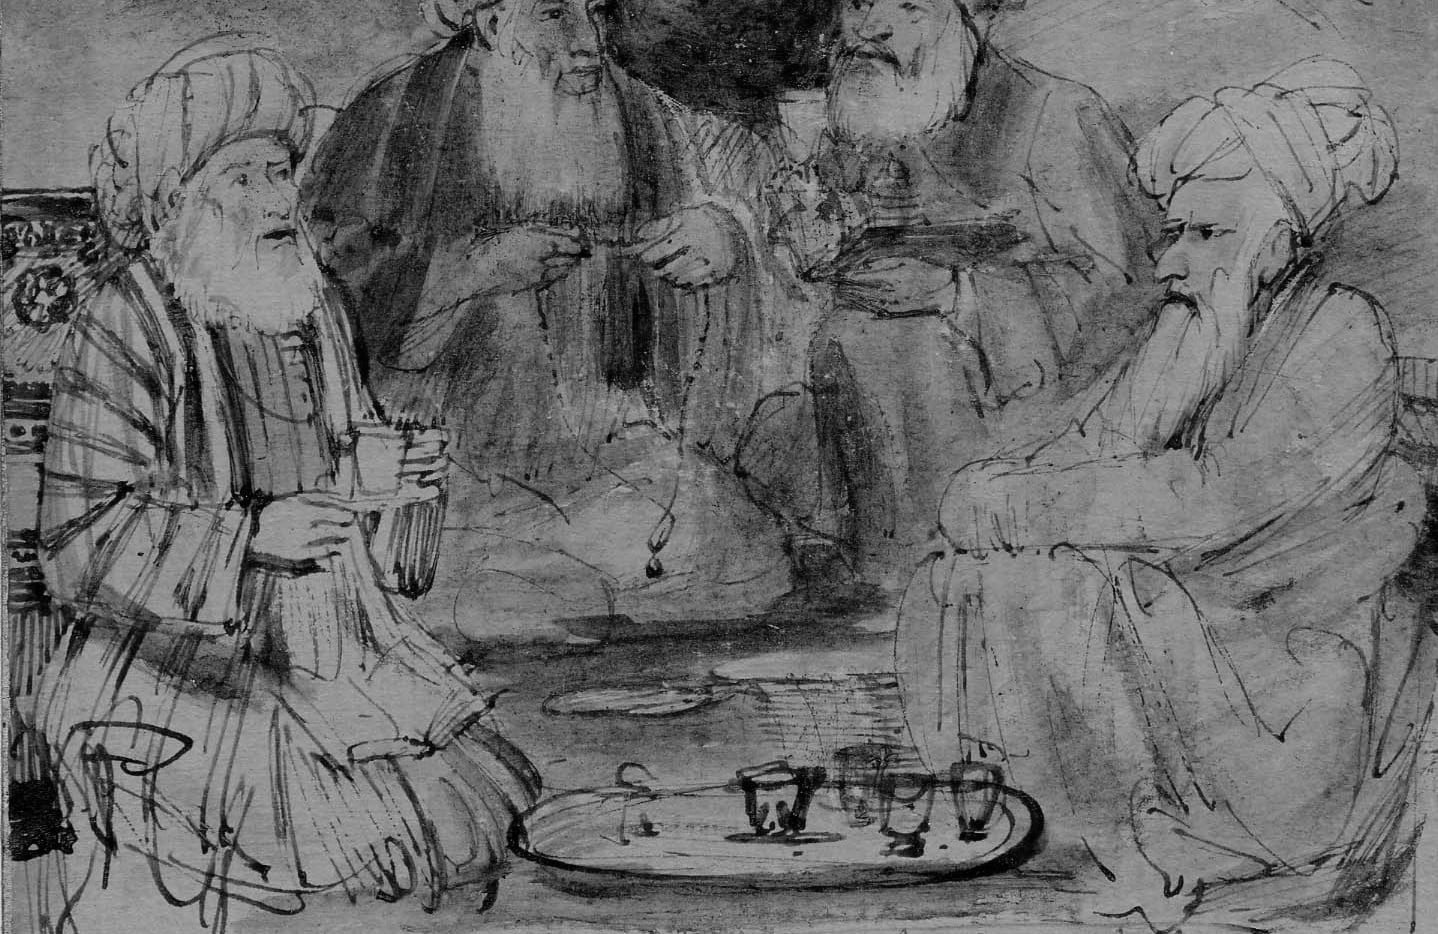 Mullahs drink an unidentified beverage in a 17th century painting later recreated as a drawing by Rembrandt (Public domain)